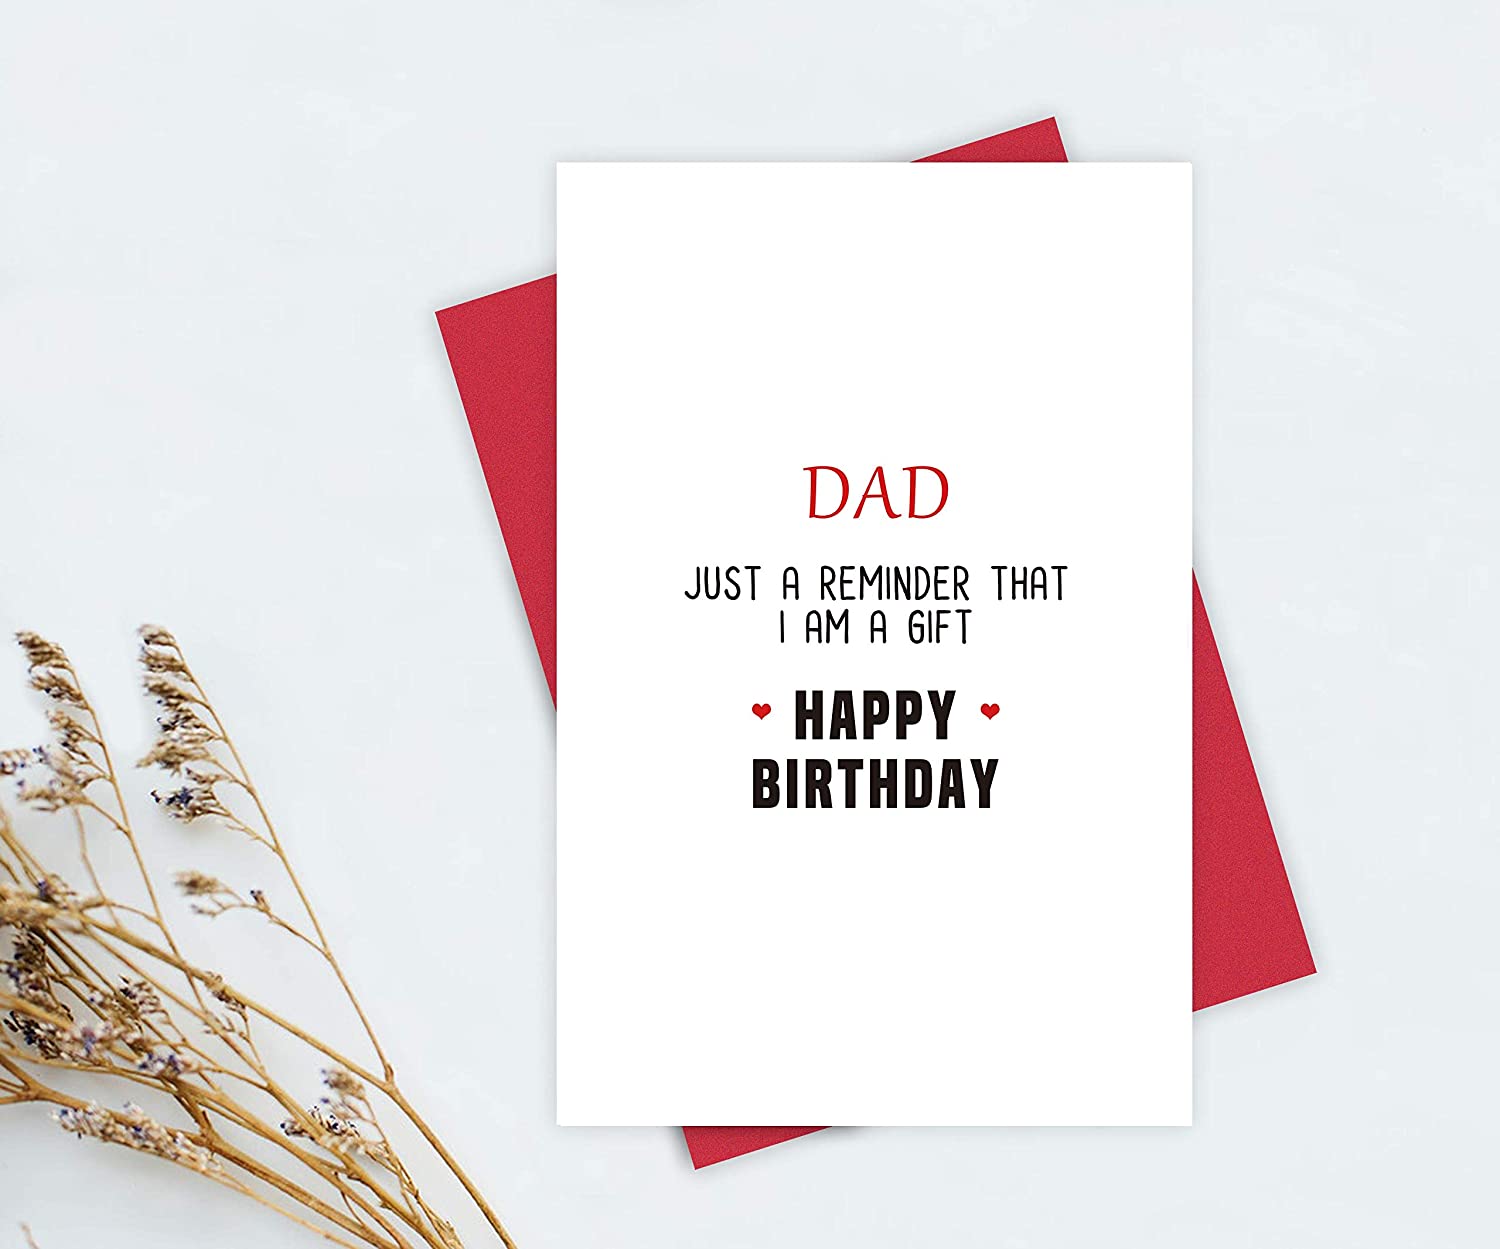 10 Funny Birthday Cards Dad Will Keep Forever - Rare